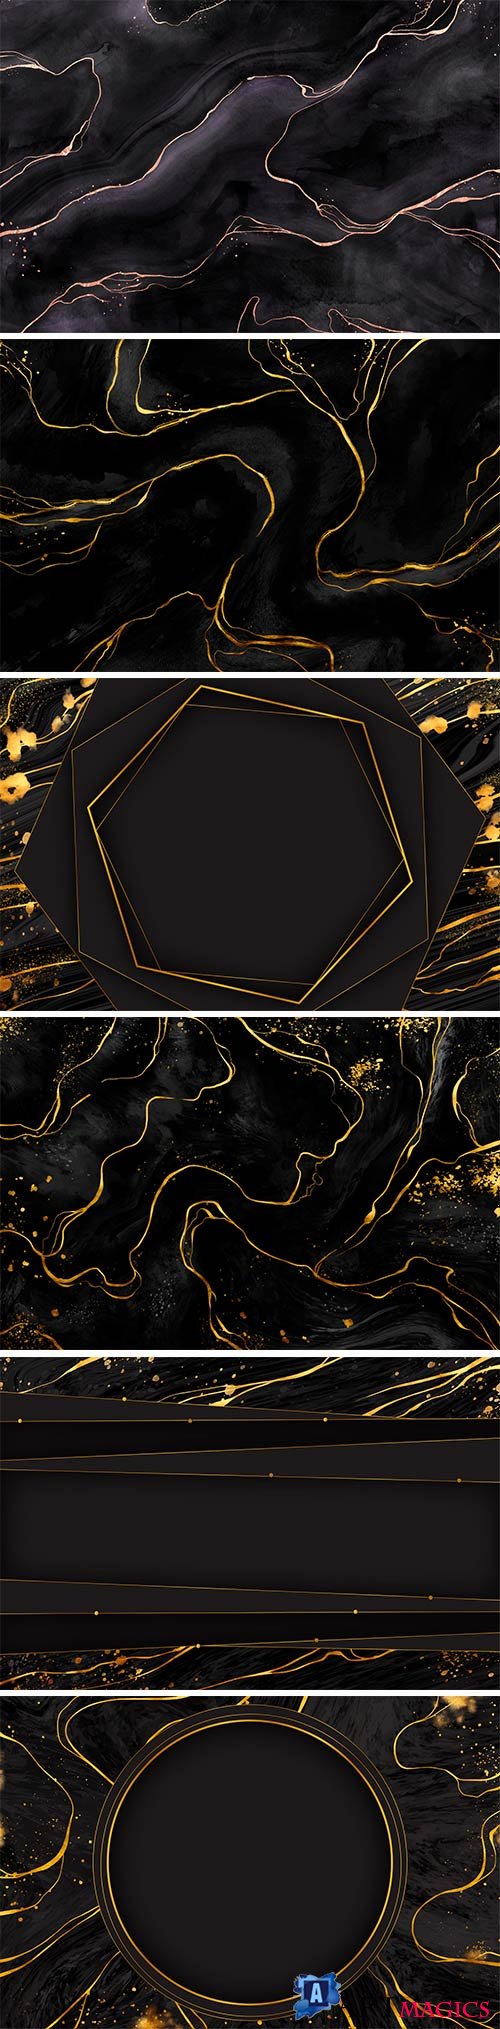 Black and golden marble vector background